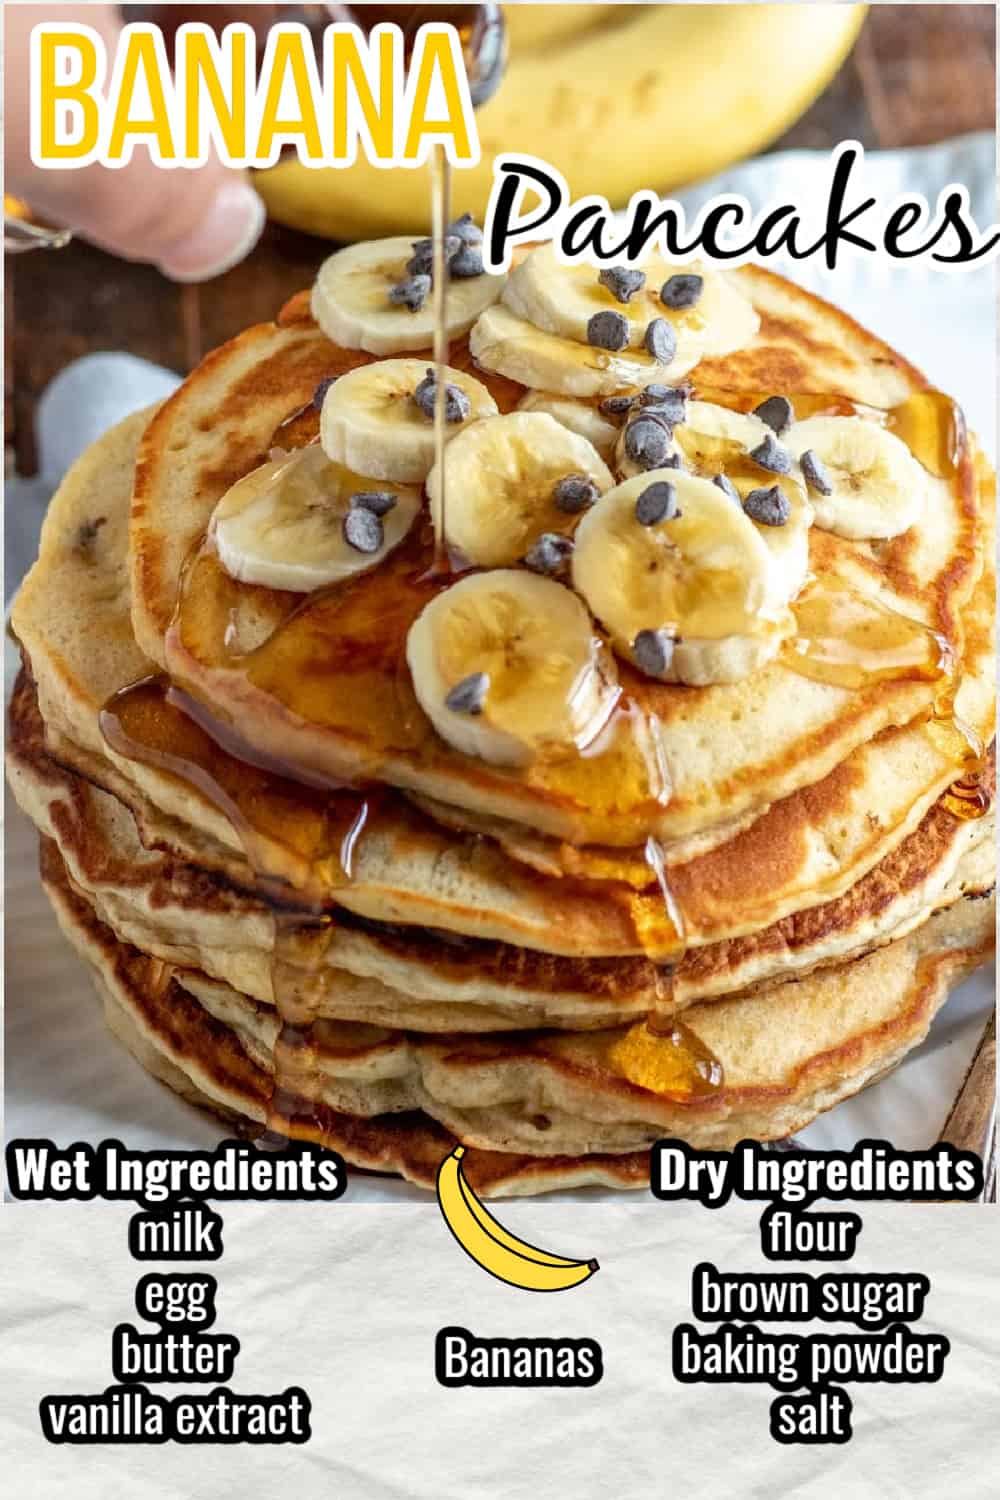 Banana pancakes on a plate with syrup being poured over, with ingredients overlaid in text.